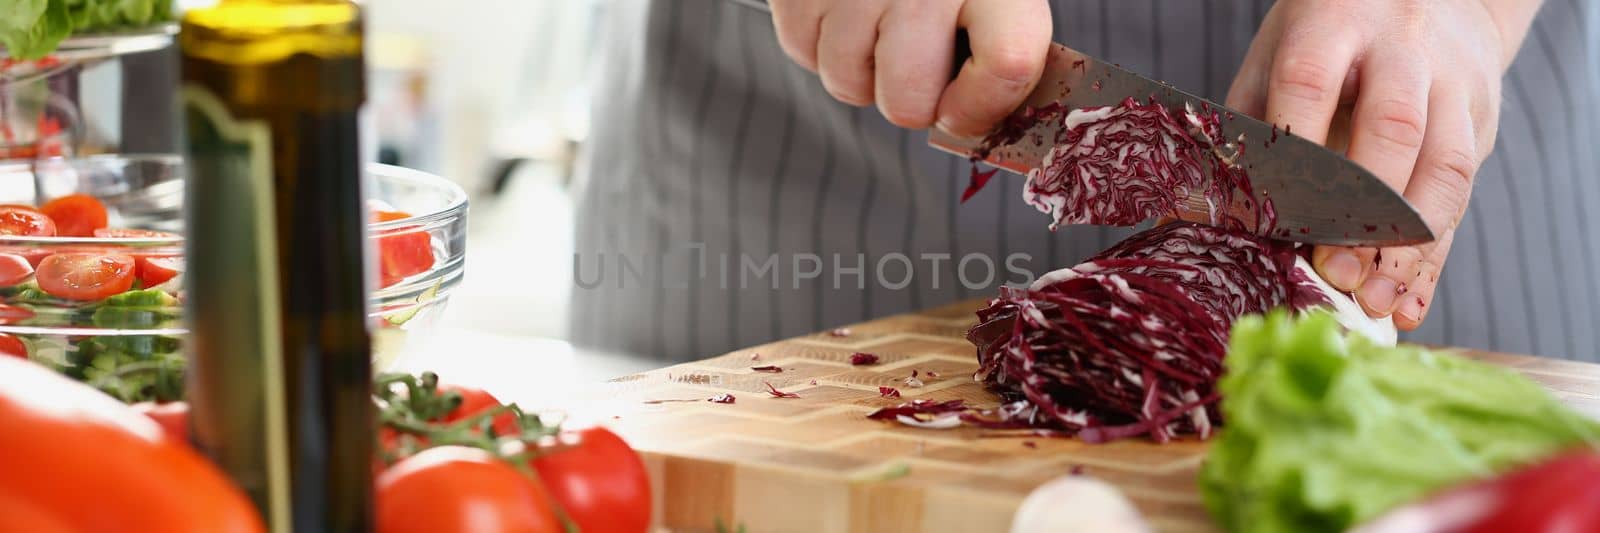 Male hands are chopping red cabbage on cutting board surrounded by various fresh vegetables on table. Closeup of male hands slicing fresh vegetables on cutting board